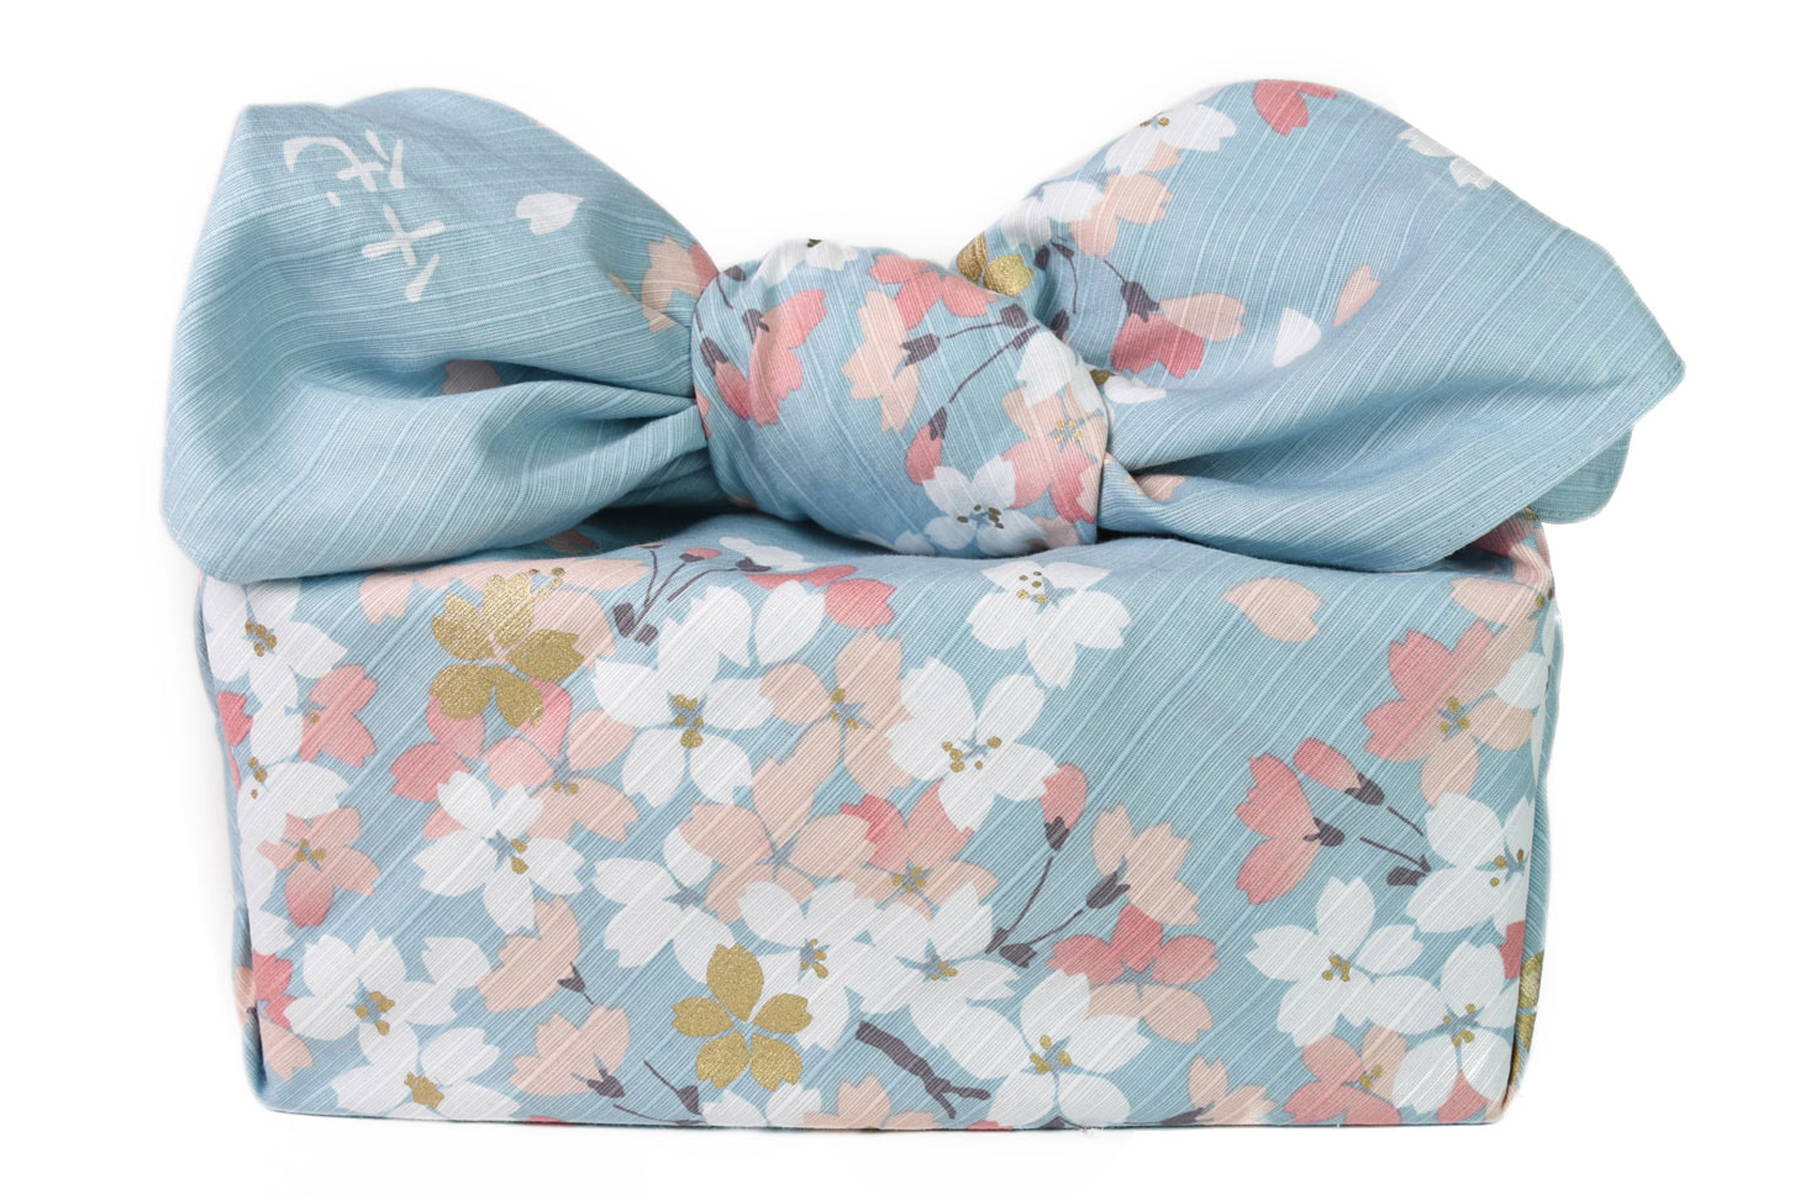 https://shop.japanobjects.com/fr/collections/furoshiki-wrapping-cloth